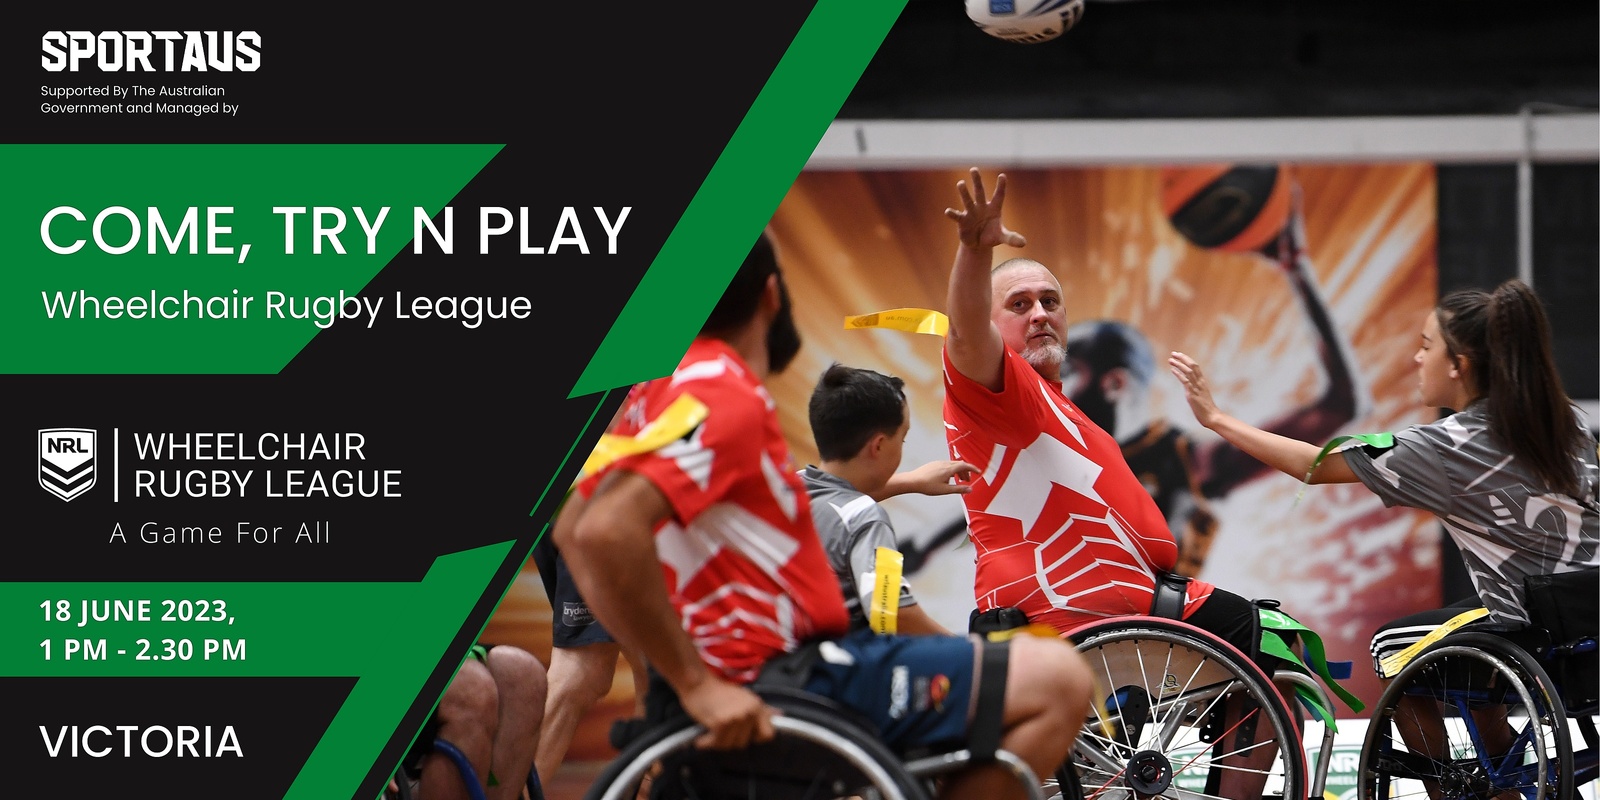 Come, Try & Play Wheelchair Rugby League - Victoria